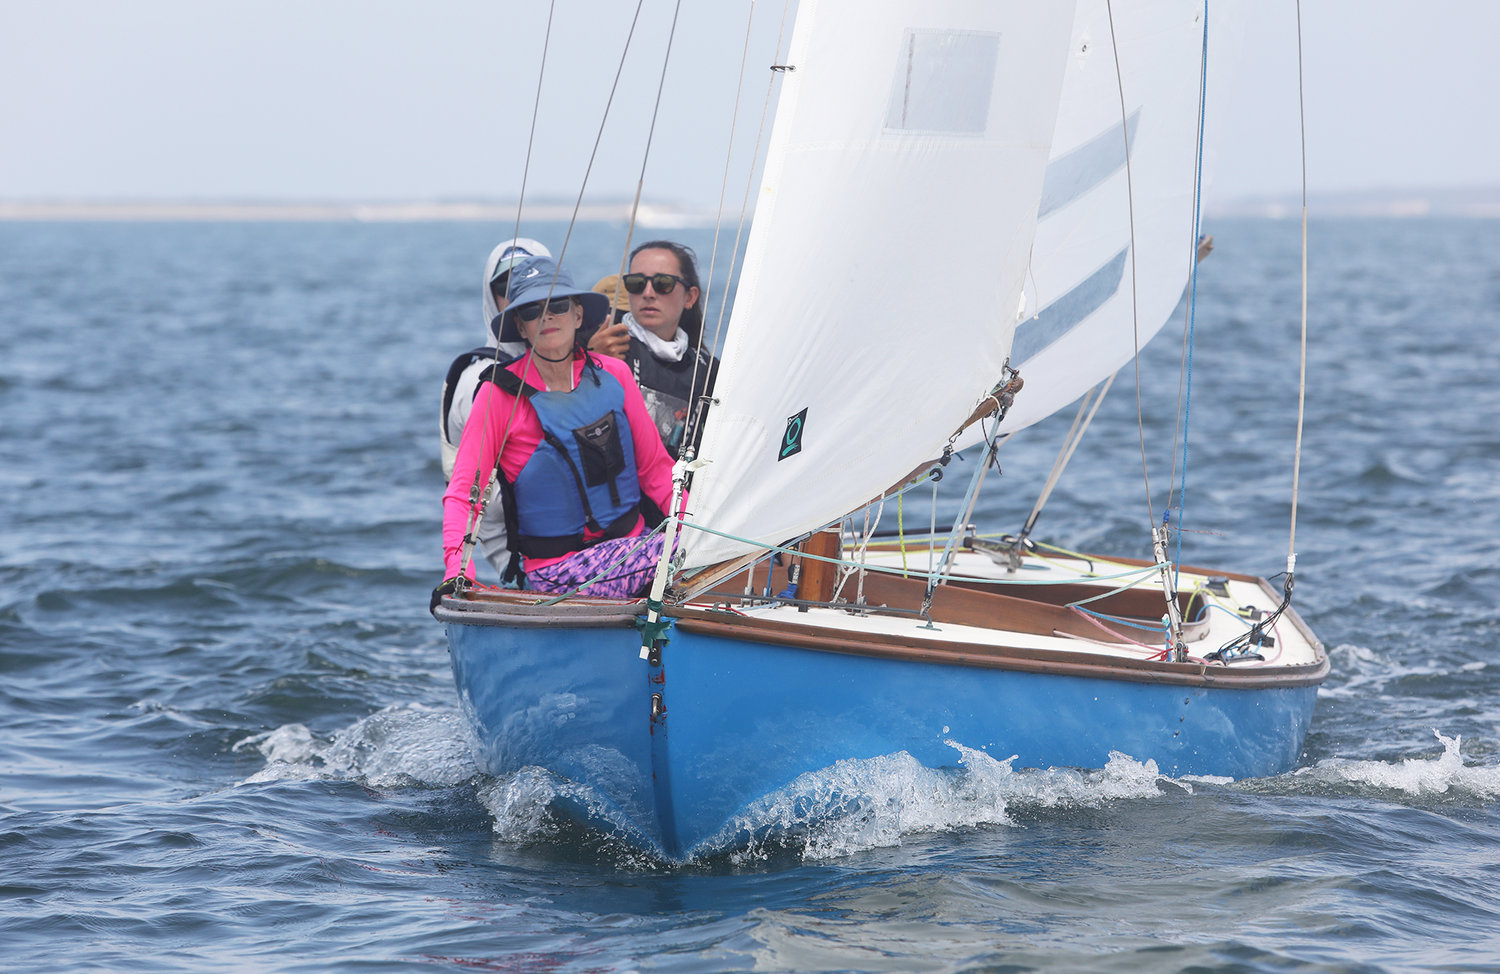 Lucinda Ballard aboard the Sassaquin (44) competing in the Indian division of the One Design Regatta in Nantucket Harbor on the opening day of Race Week 2021.